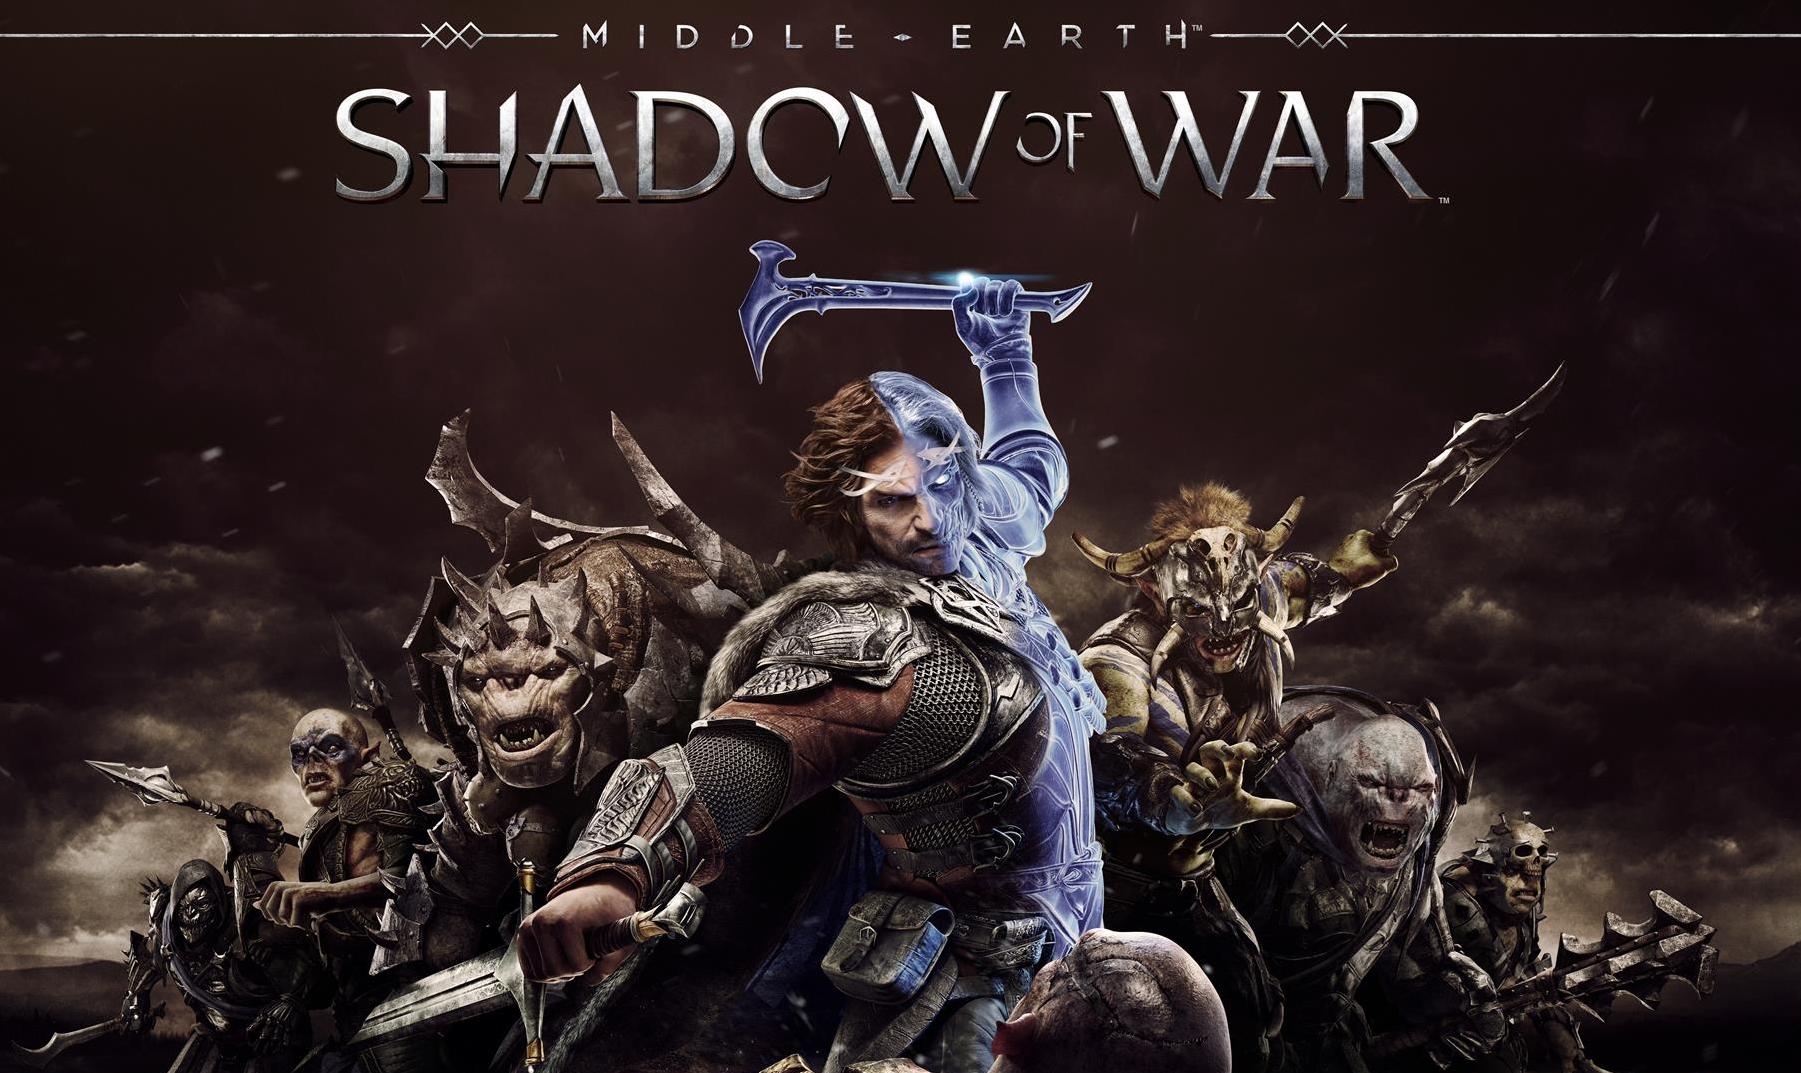 Middle-earth: Shadow of War, The One Wiki to Rule Them All